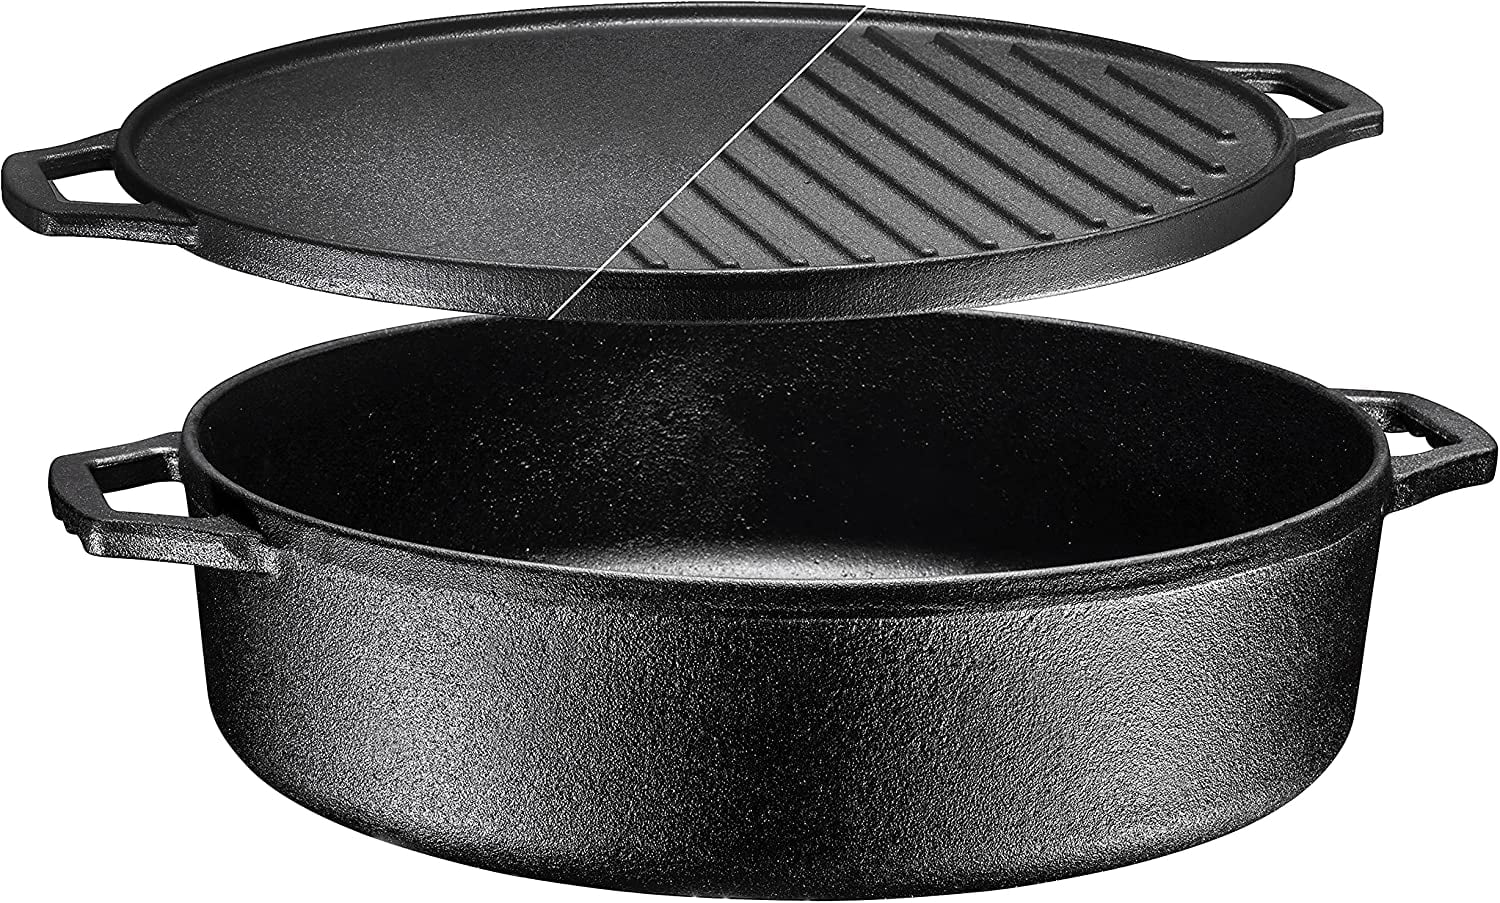 Risa Grill Pan and Soup Pot Lid, Cast Iron, Black, Nonstick for Stovetop,  Oven